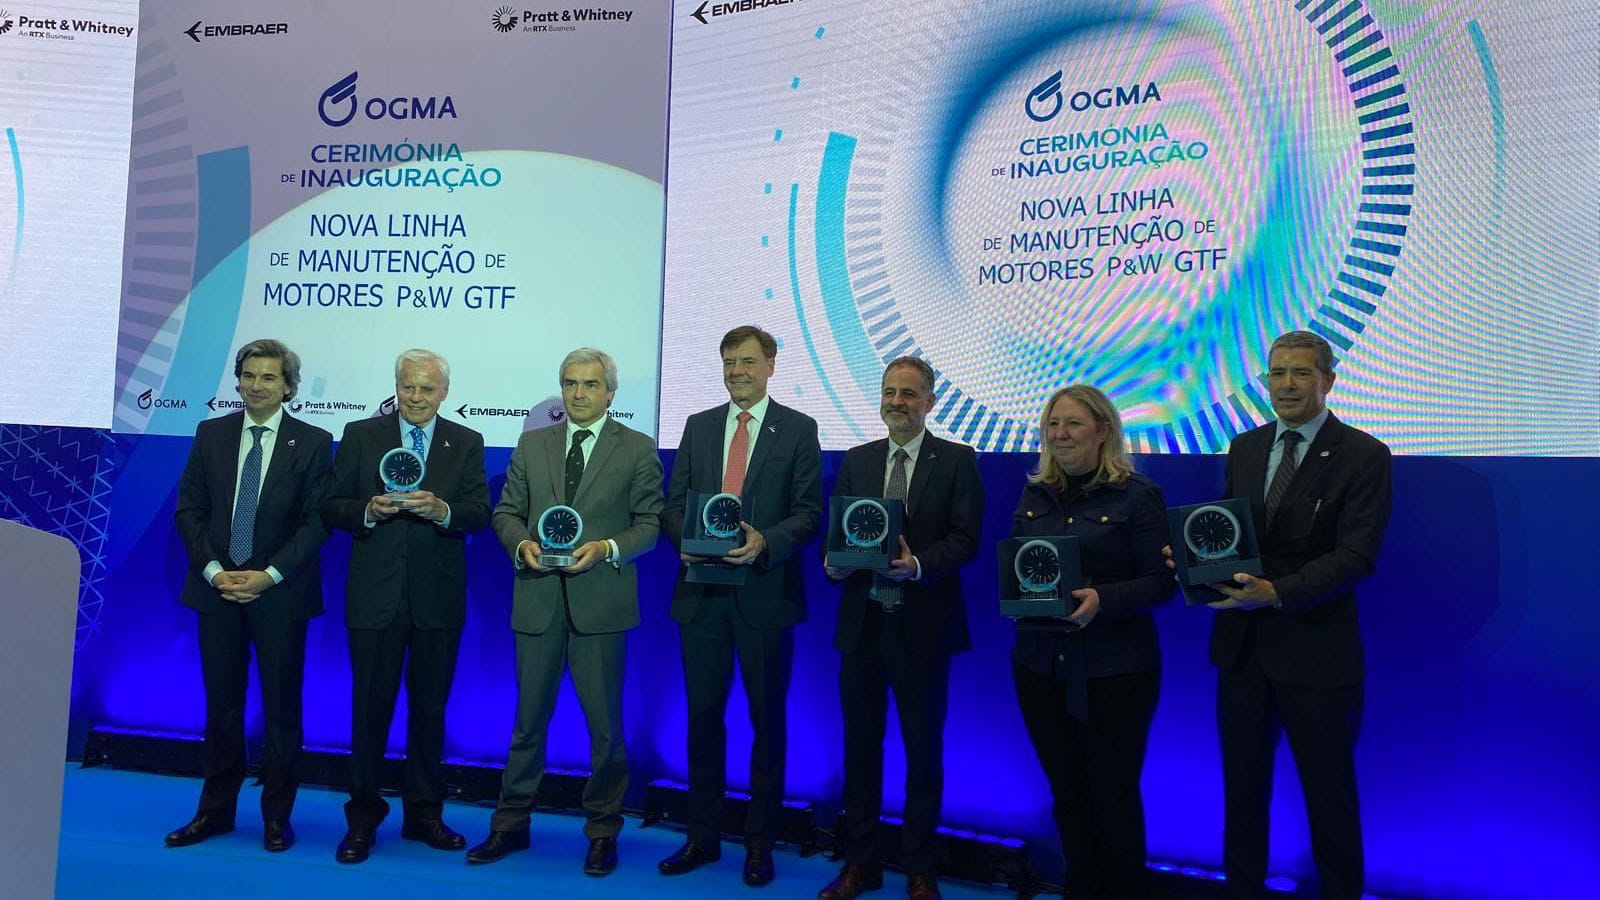 From L to R: Paulo Monginho, CEO of OGMA; Alexandre Silva, Embraer Chairman of the Board of Directors; Portugal Minister of Defense, Nuno Melo; Francisco Gomes Neto, President & CEO of Embraer; Carlos Naufel, Chairman of the Board of Directors at OGMA; Amy Comer, Vice President of GTF Programs at Pratt & Whitney; and Carlos Félix, President of the IdD Board of Directors, commemorate OGMA's facility inauguration and induction of the first Pratt & Whitney GTF engine in Alverca, Portugal.